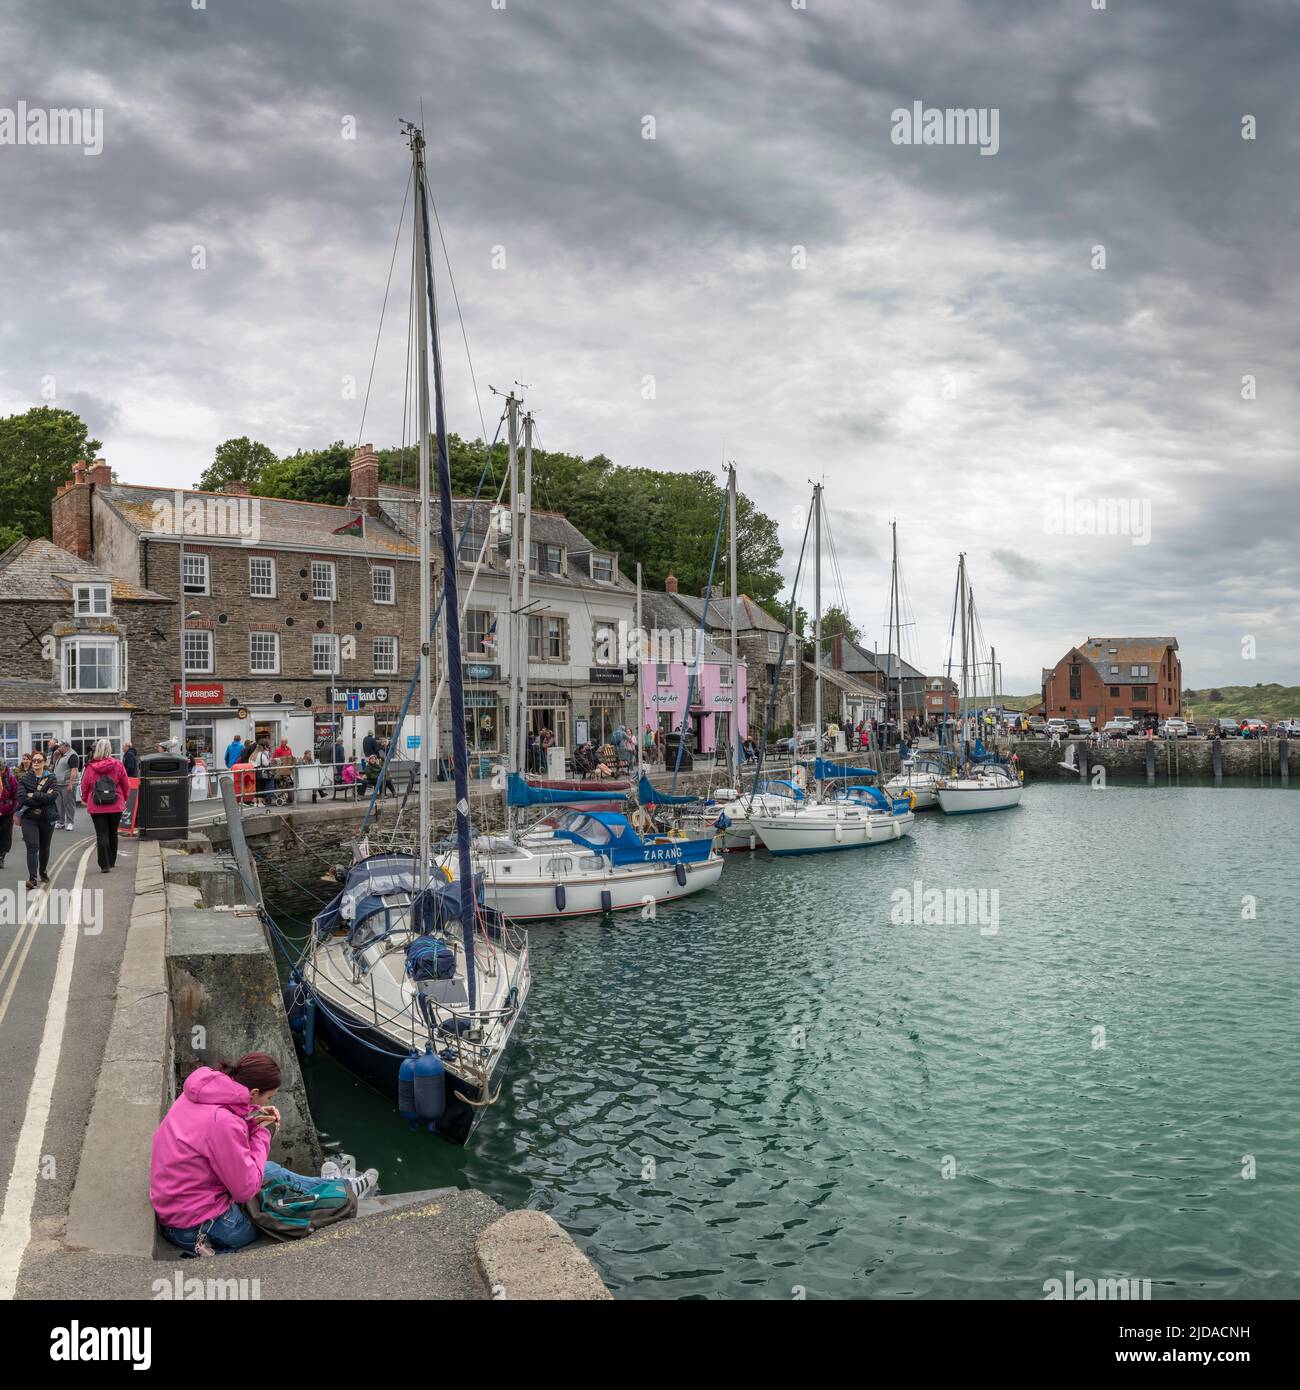 Padstow, Cornwall, England. Sunday 19th June 2022. A busy Sunday around the picturesque harbour of Padstow in Cornwall. Despite the overcast sky and o Stock Photo